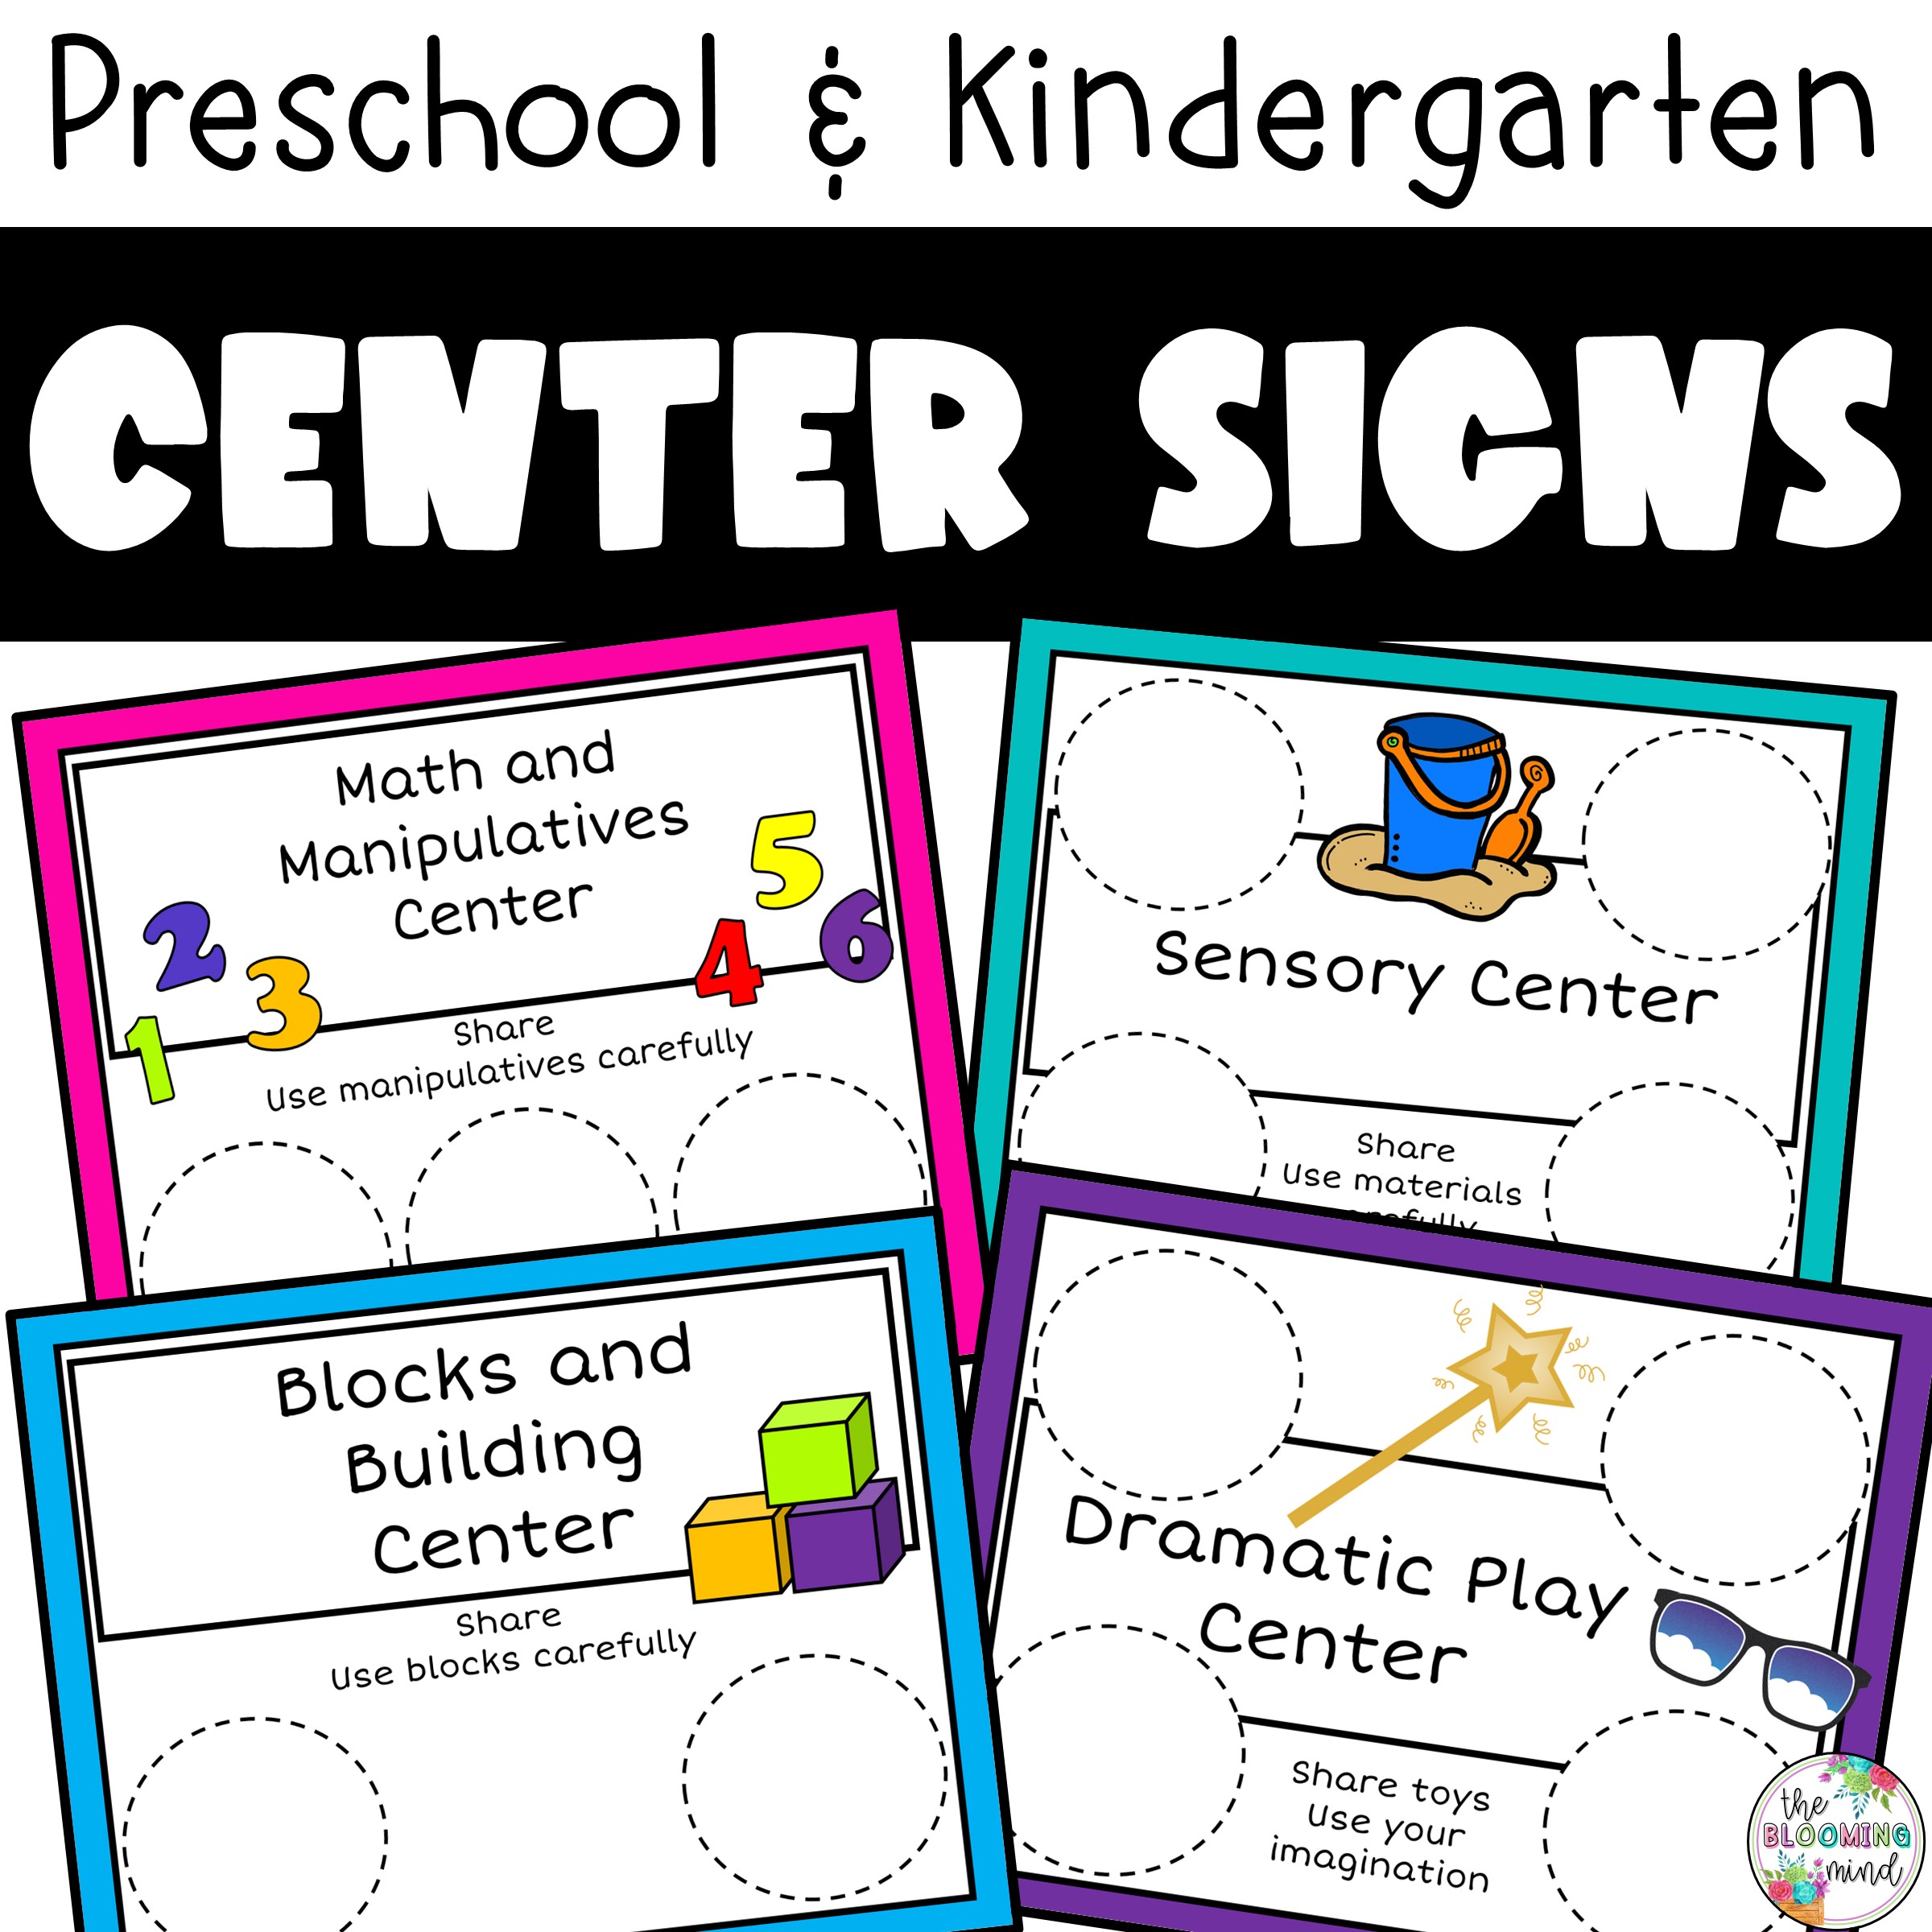 Center signs for preschool and kindergarten learning centers made by teachers